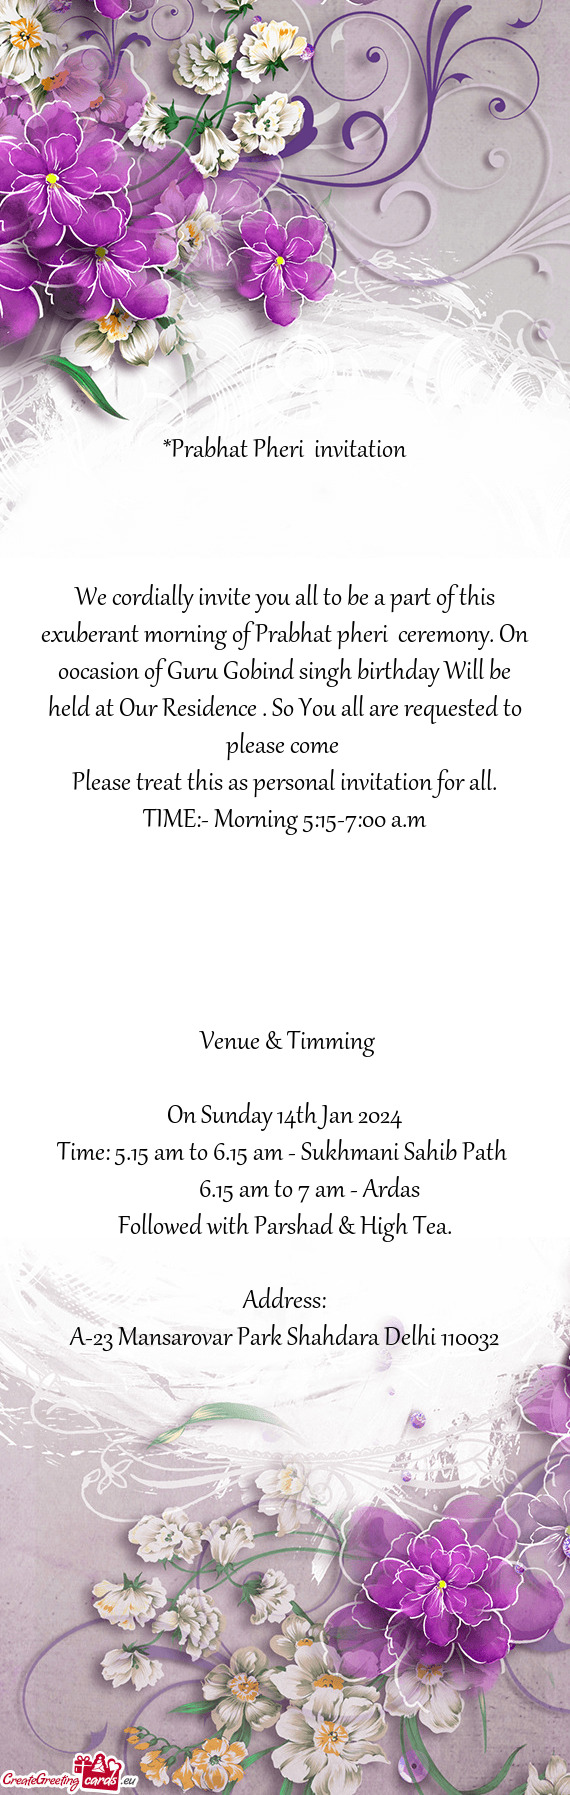 We cordially invite you all to be a part of this exuberant morning of Prabhat pheri ceremony. On oo